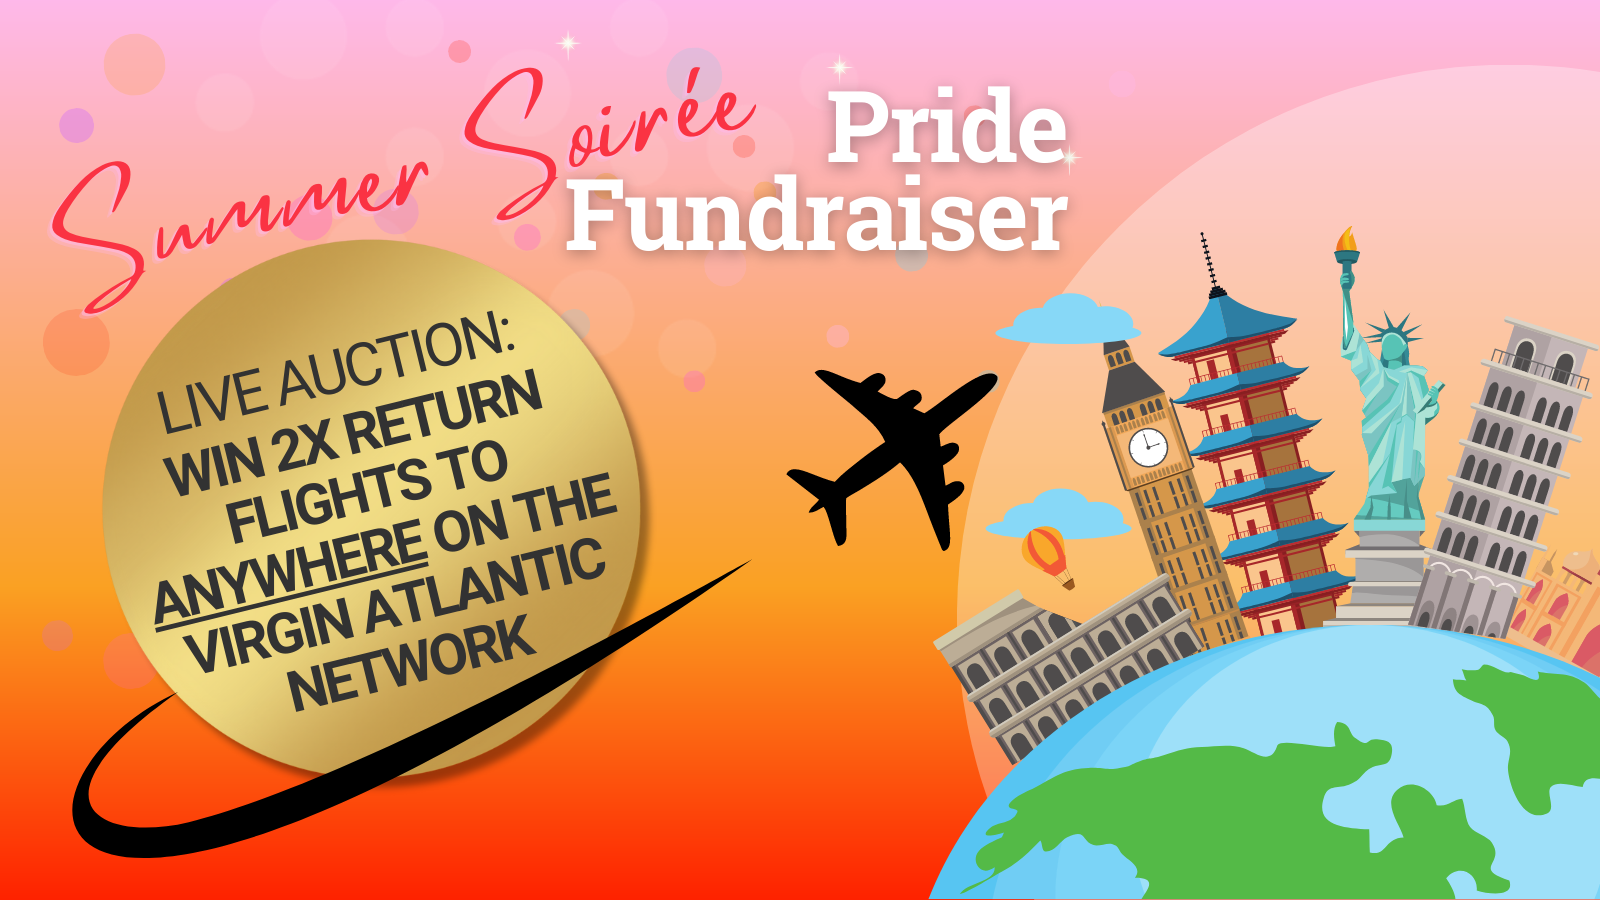 Win 2 Return Flights to ANYWHERE on the Virgin Atlantic Network at the Diversity Role Models Pride Fundraiser 2023